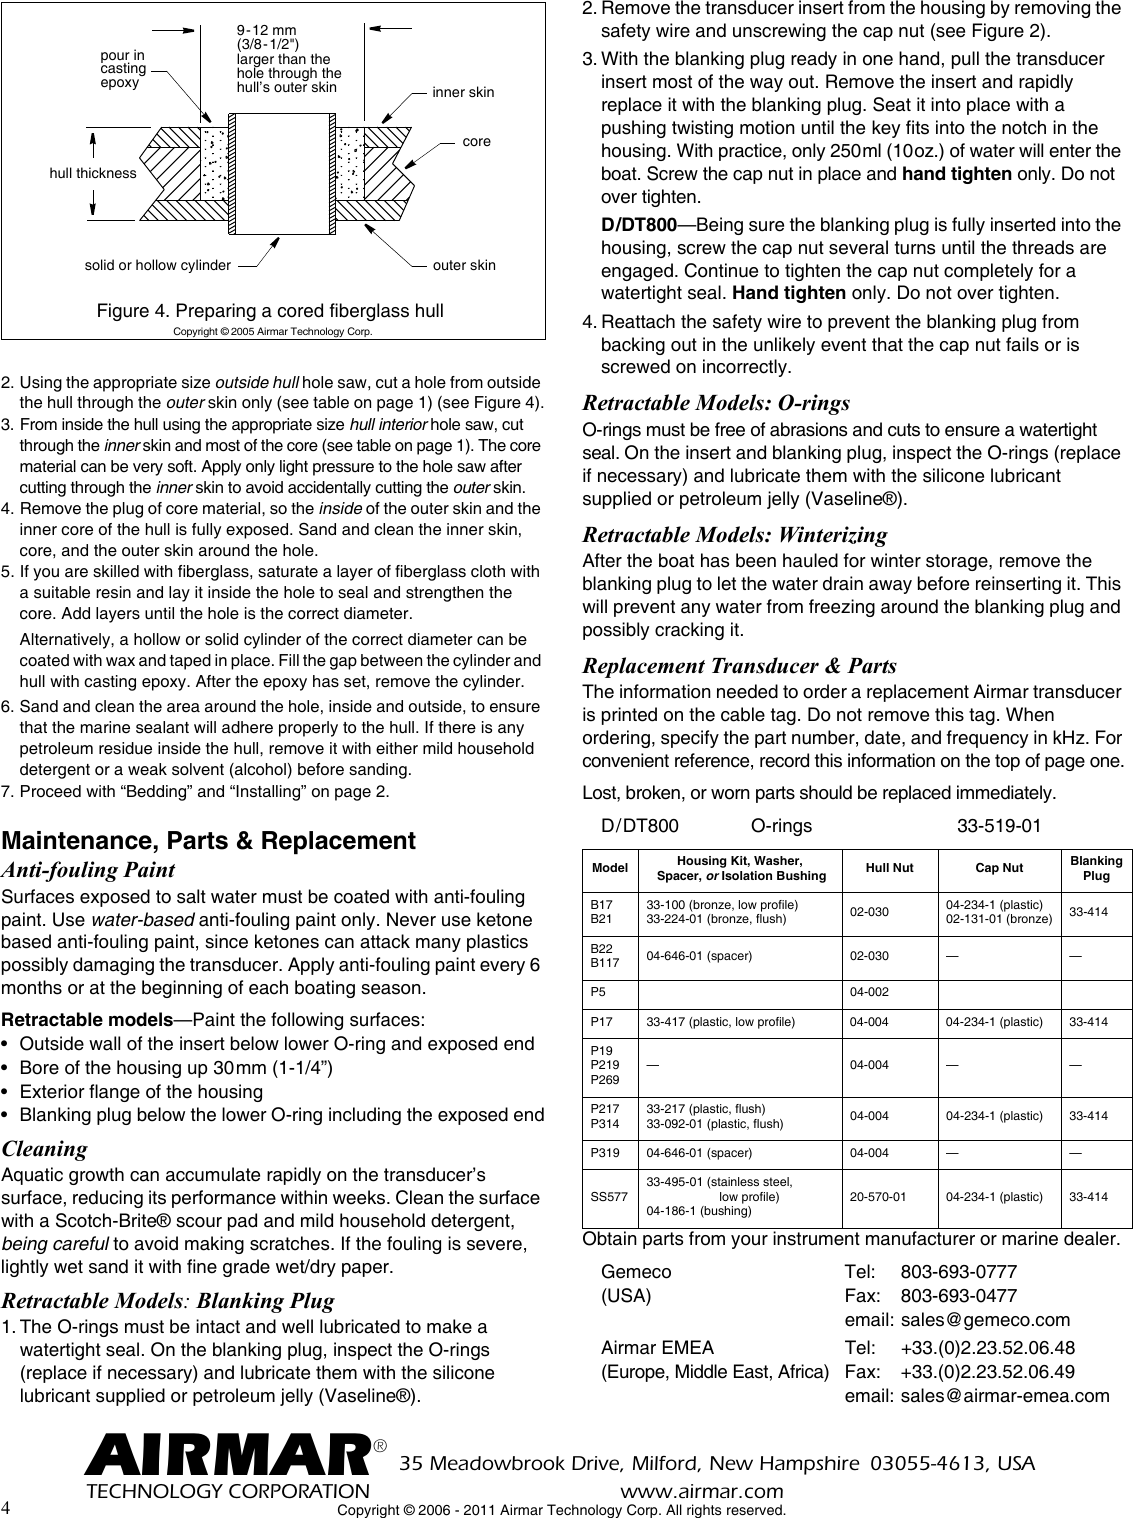 Page 4 of 4 - Furuno Furuno-235Dht-Mse-Installation-Instructions- 17-006-01-rev11_TH_Flush  Furuno-235dht-mse-installation-instructions